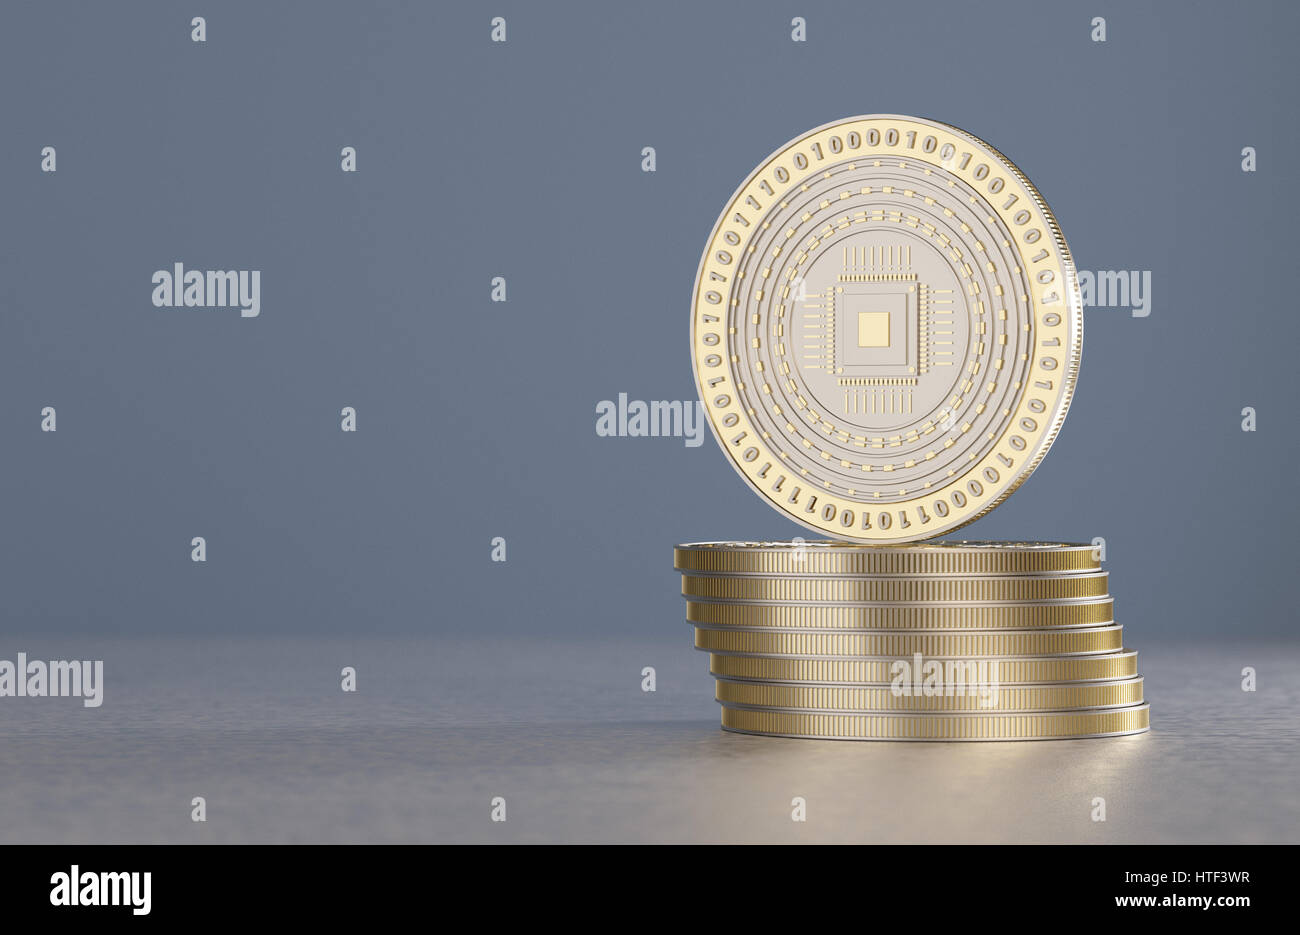 Stack of silver coins as example for virtual crypto currency, bitcoin and blockchain technology Stock Photo